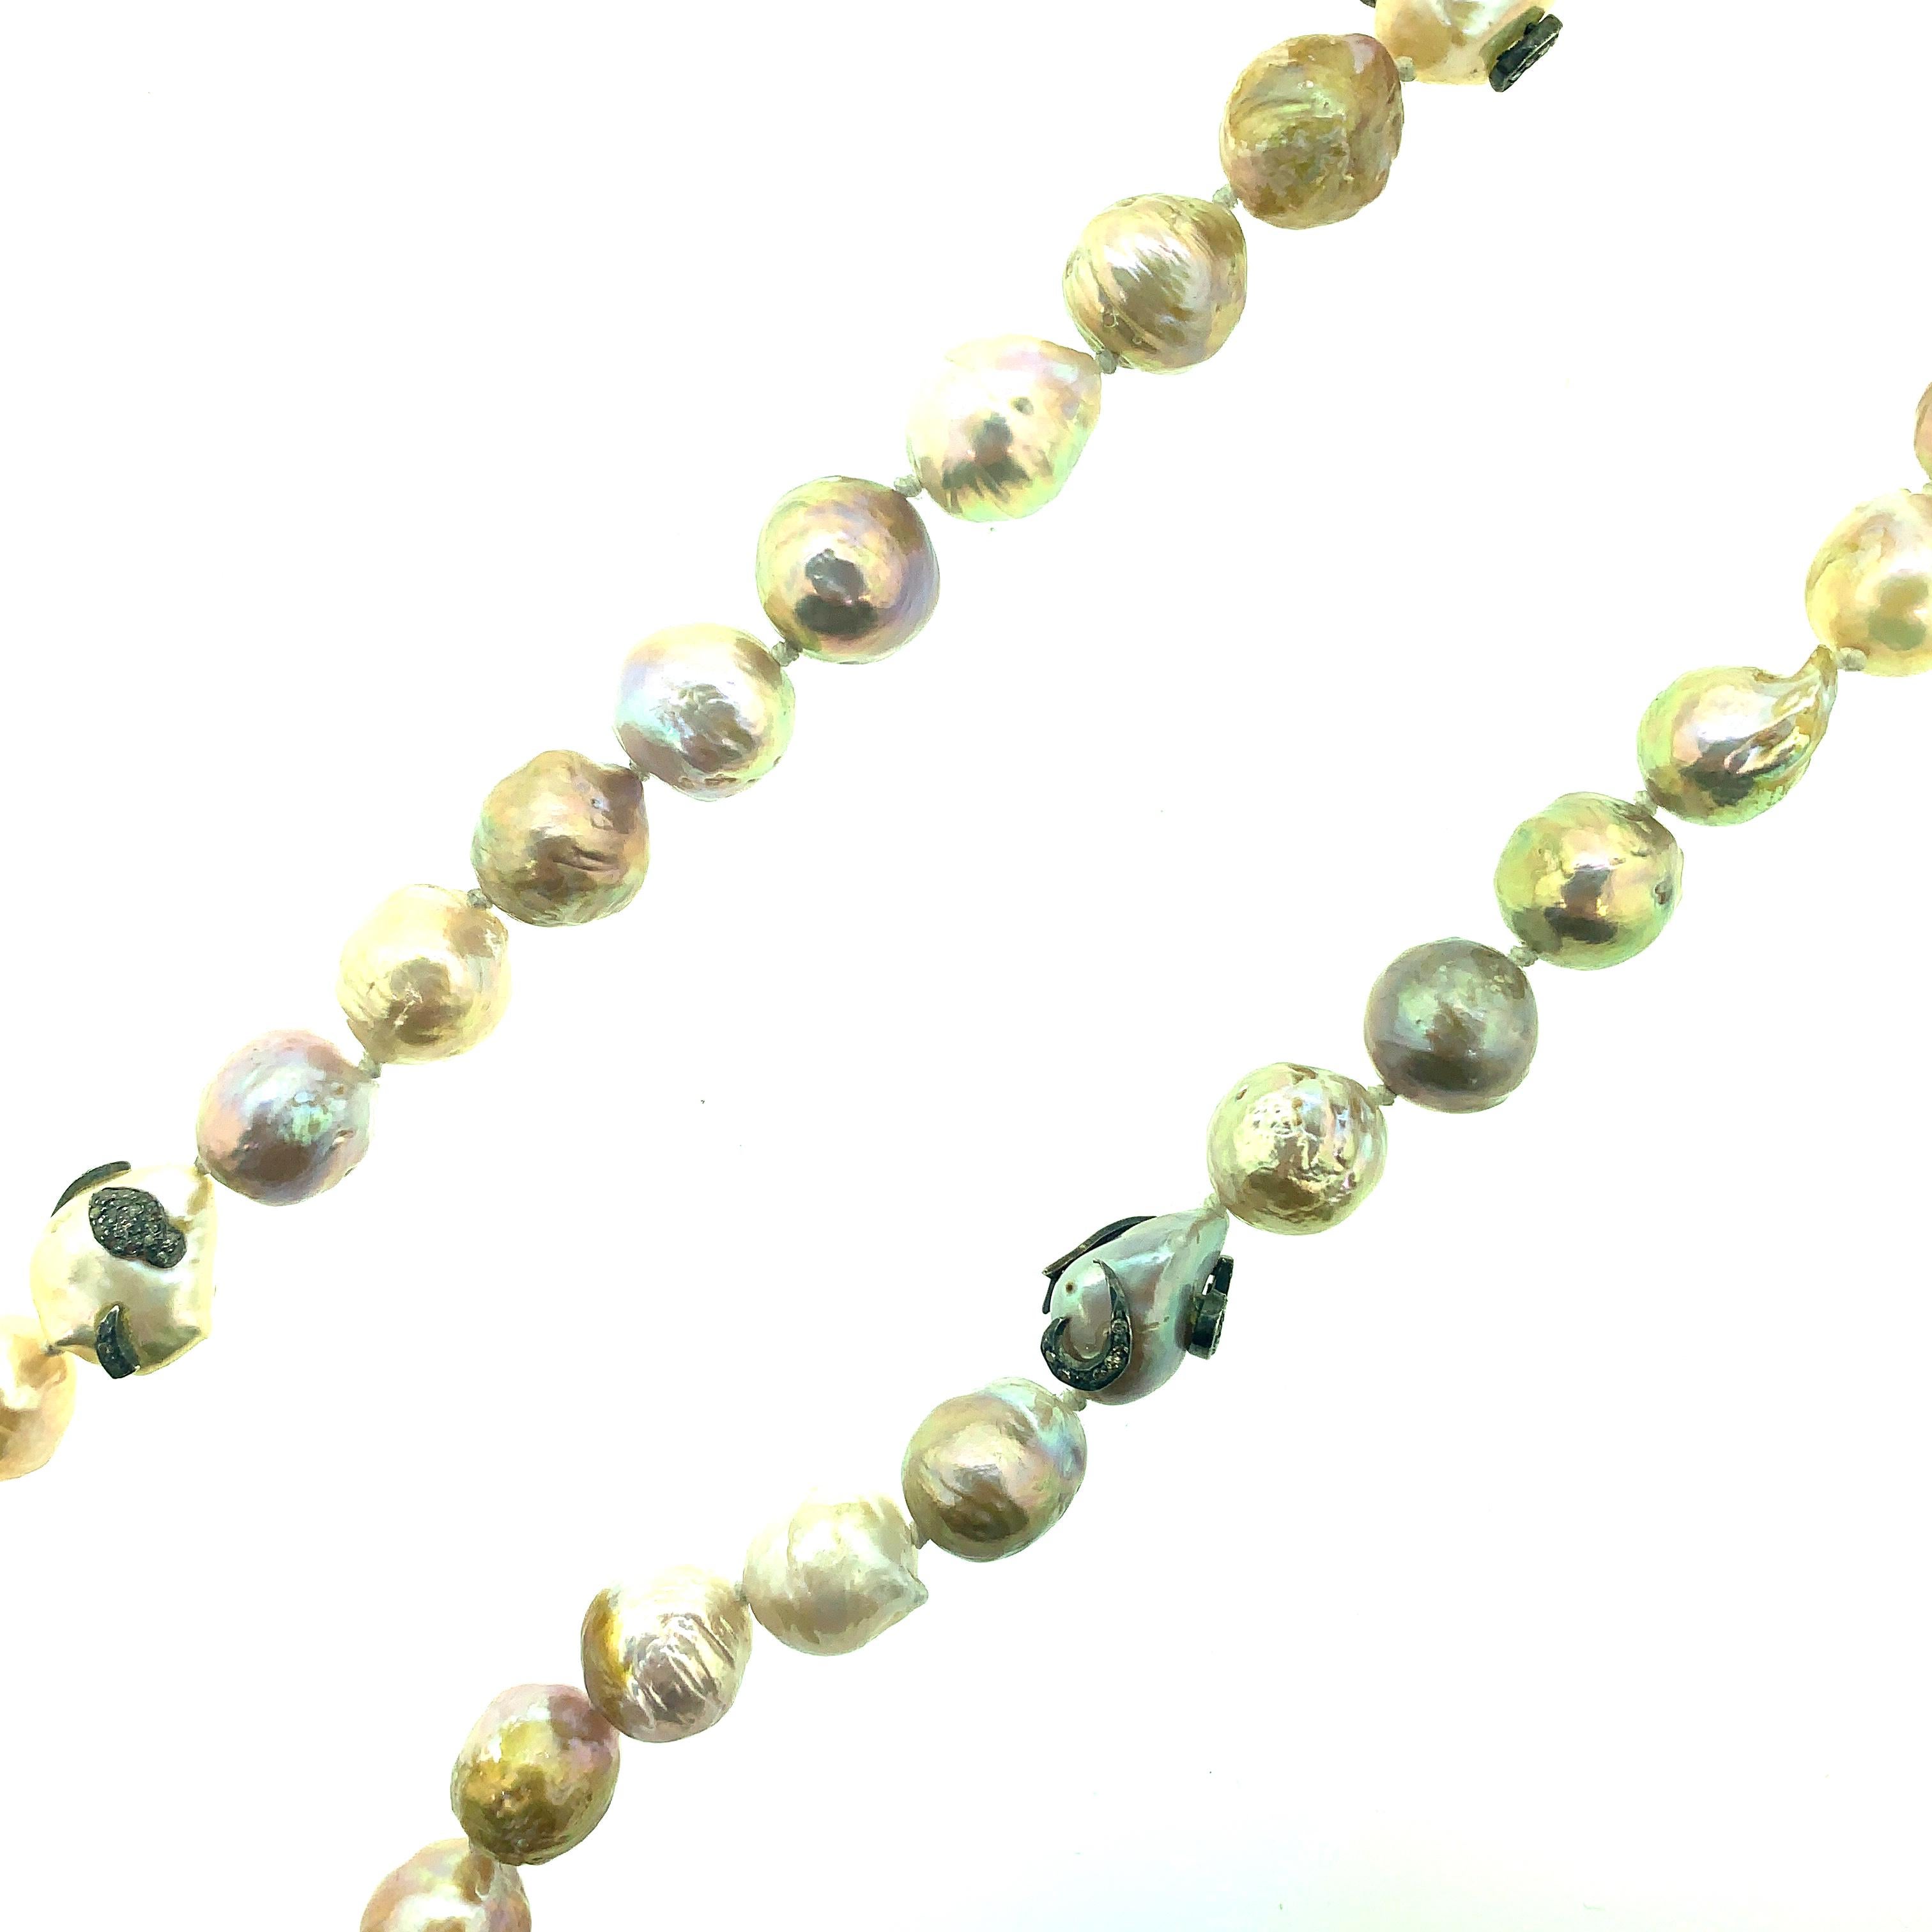 32 Inch Long 649.50 ct Freshwater Pearl (all real and natural) Necklace set in Oxidized Sterling Silver with 0.75 ct Pave Champagne Diamonds on three pearls. The necklace is made with knotted threads in white with pearl in various shades of pink,